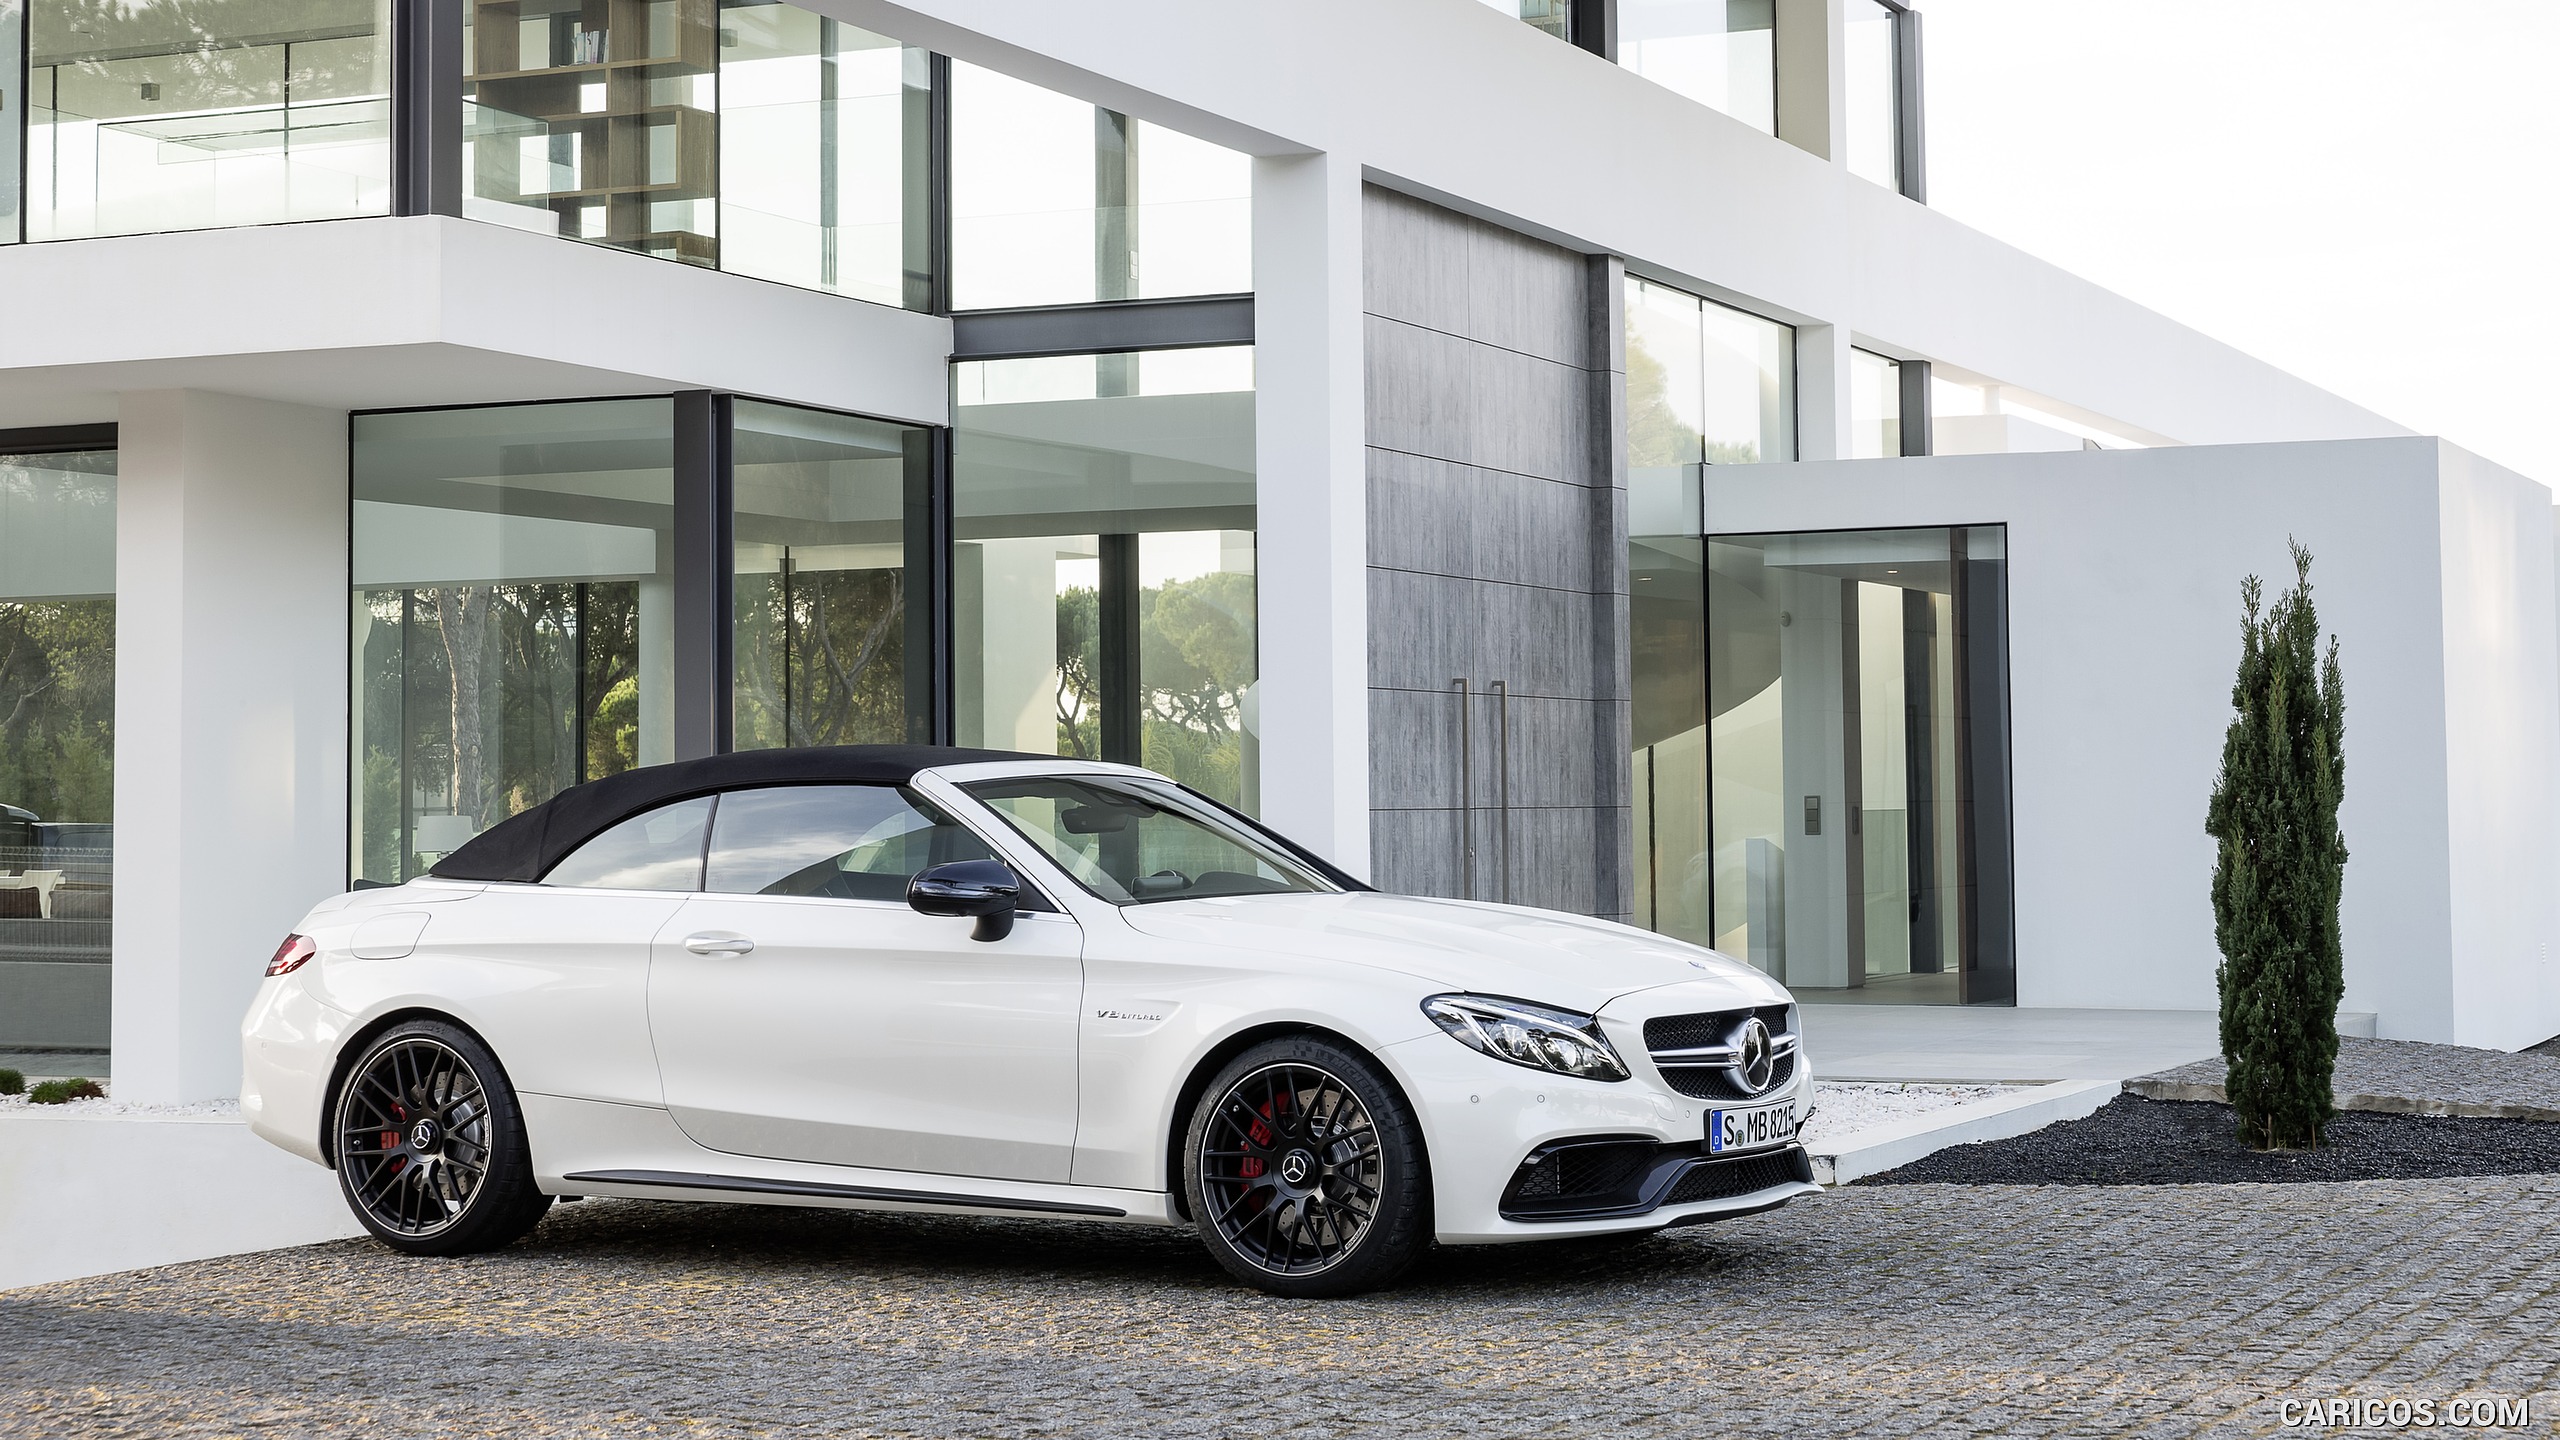 2017 Mercedes-AMG C63 S Cabriolet (Chassis: A205, Color: Designo Diamond White Bright) - Side, #16 of 222